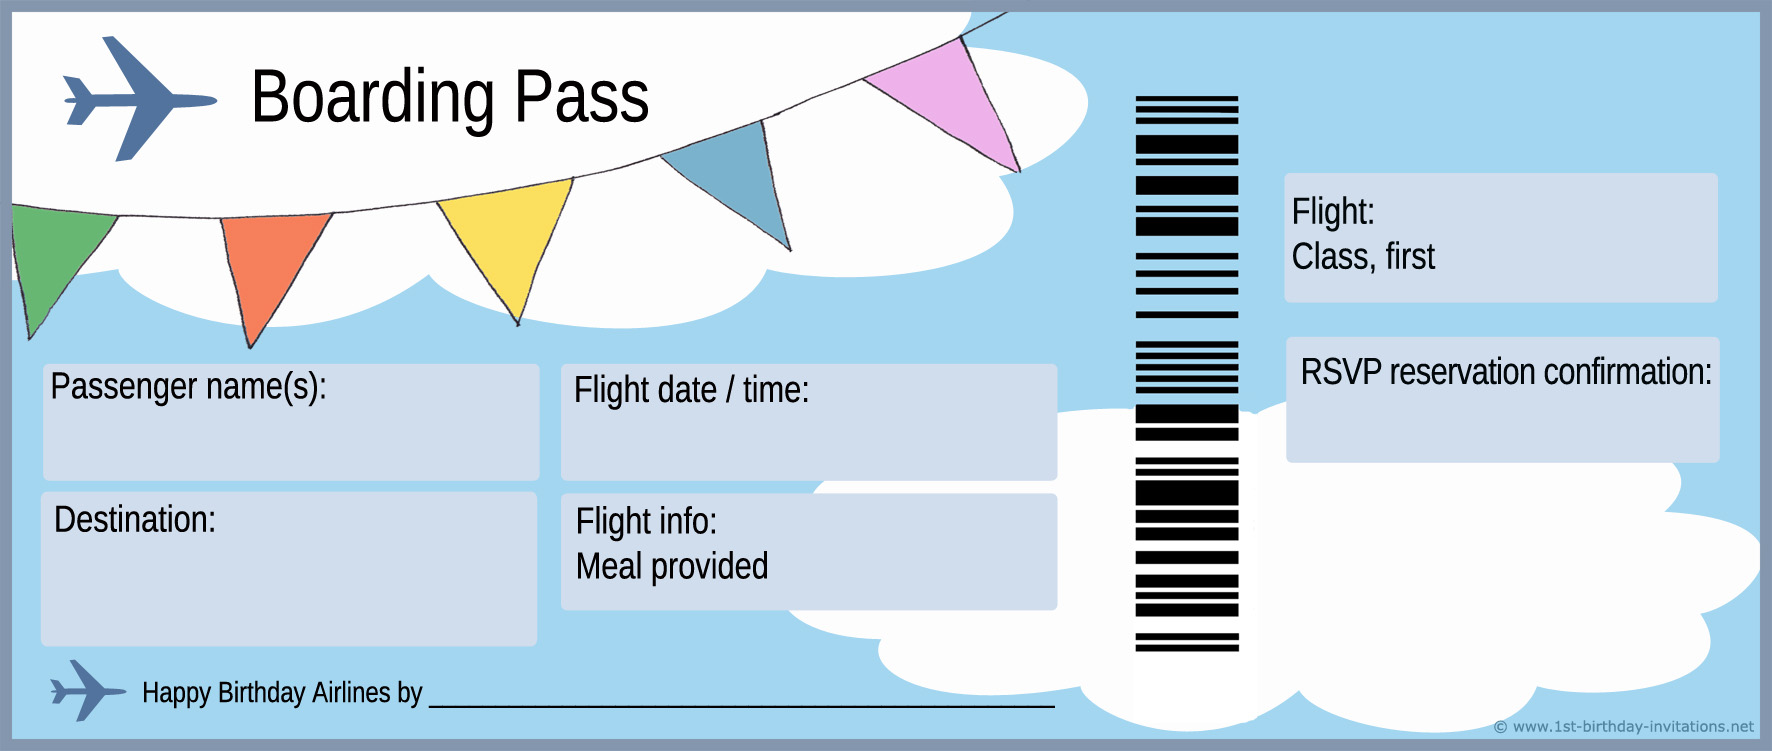 Blank Airline Ticket Template from clipart-library.com